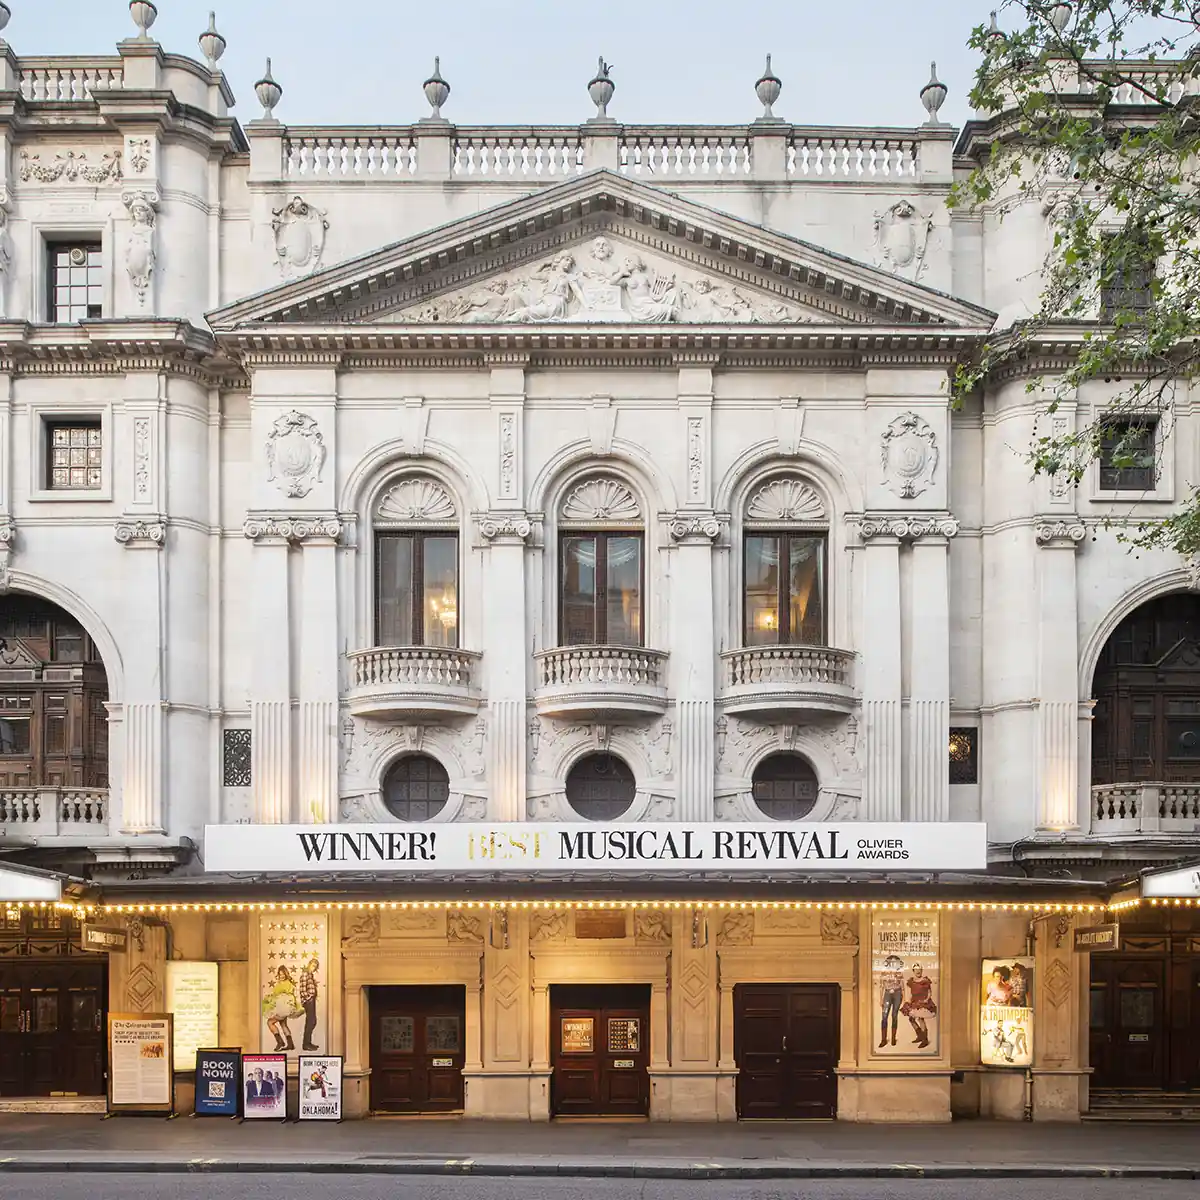 Exterior of Wyndham's Theatre in London's West End